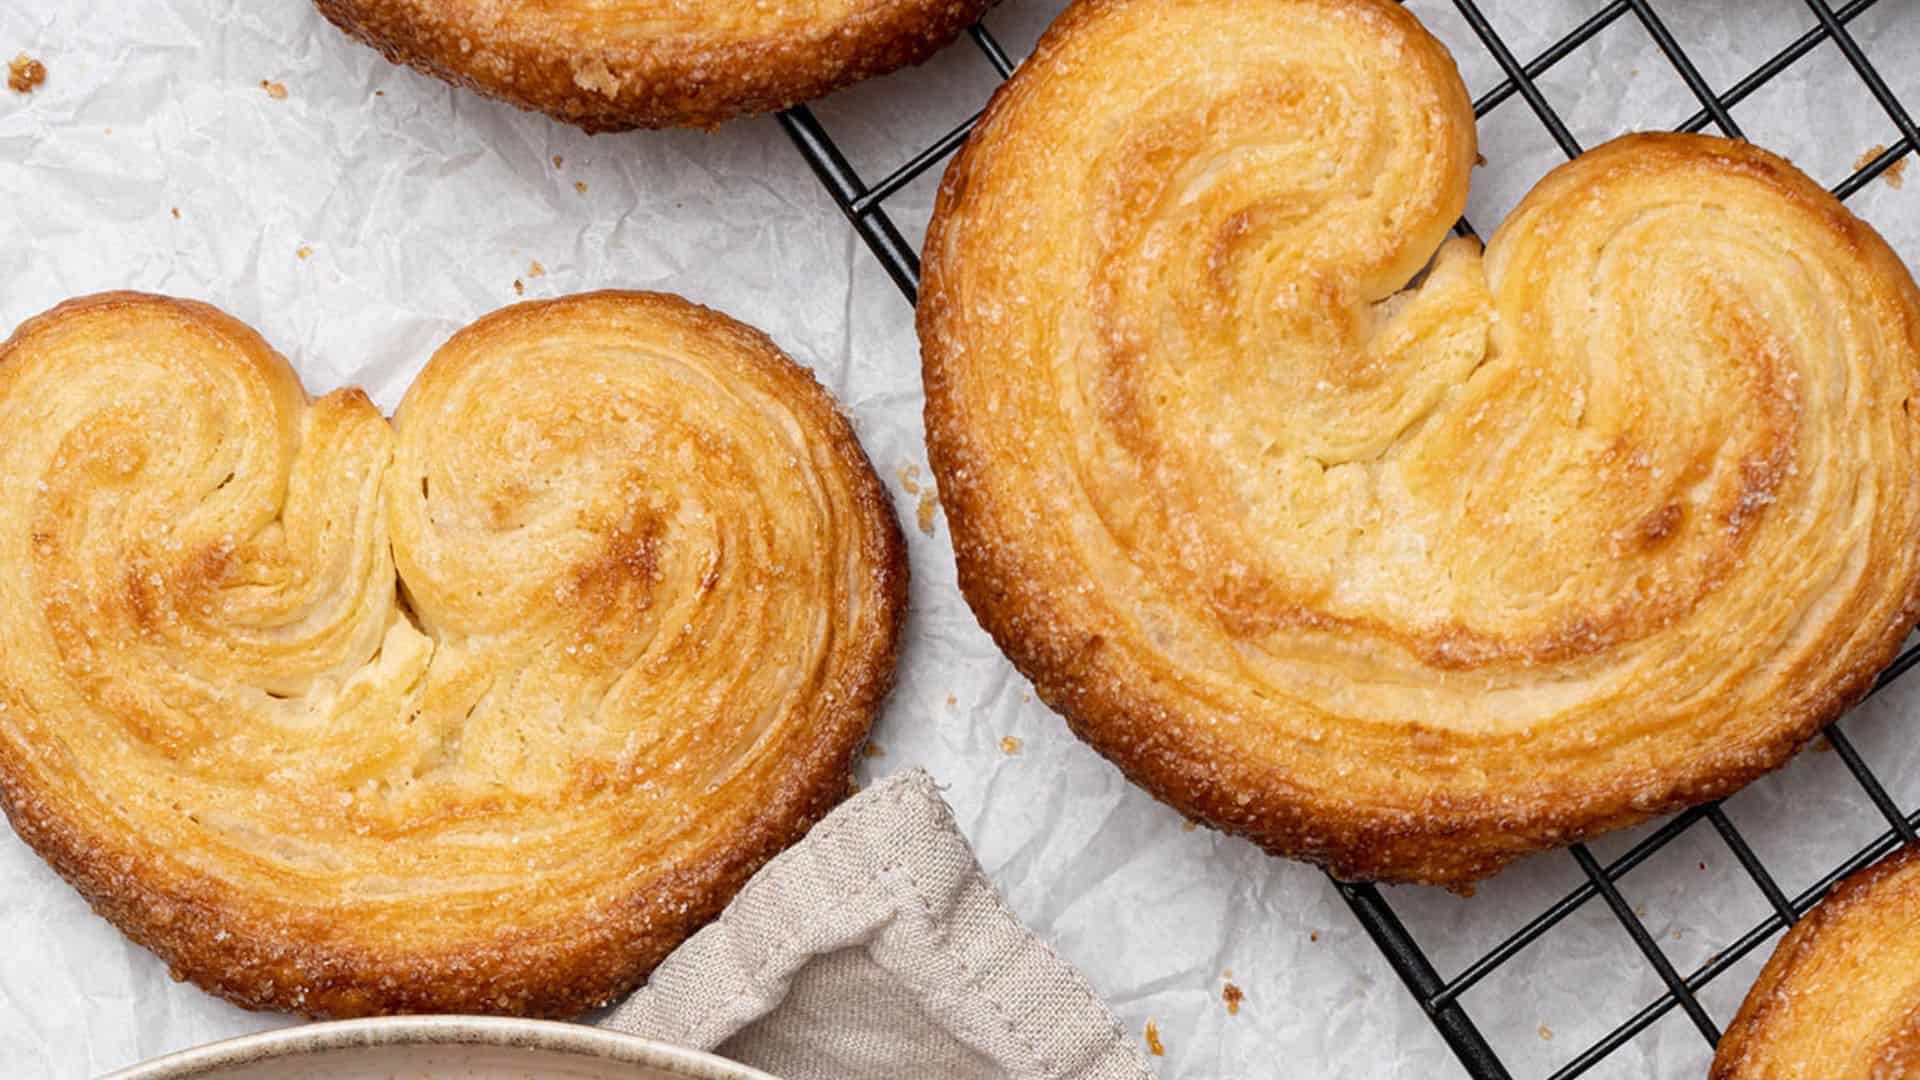 <p>These deliciously sweet and buttery Palmiers cookies are perfectly light, crispy, and crunchy perfection with each bite! Made with just a package of store-bought puff pastry and a bit of sugar, this 2-ingredient easy recipe comes together in just 40 minutes! Your family is sure to be impressed when you present them with these famous...</p>